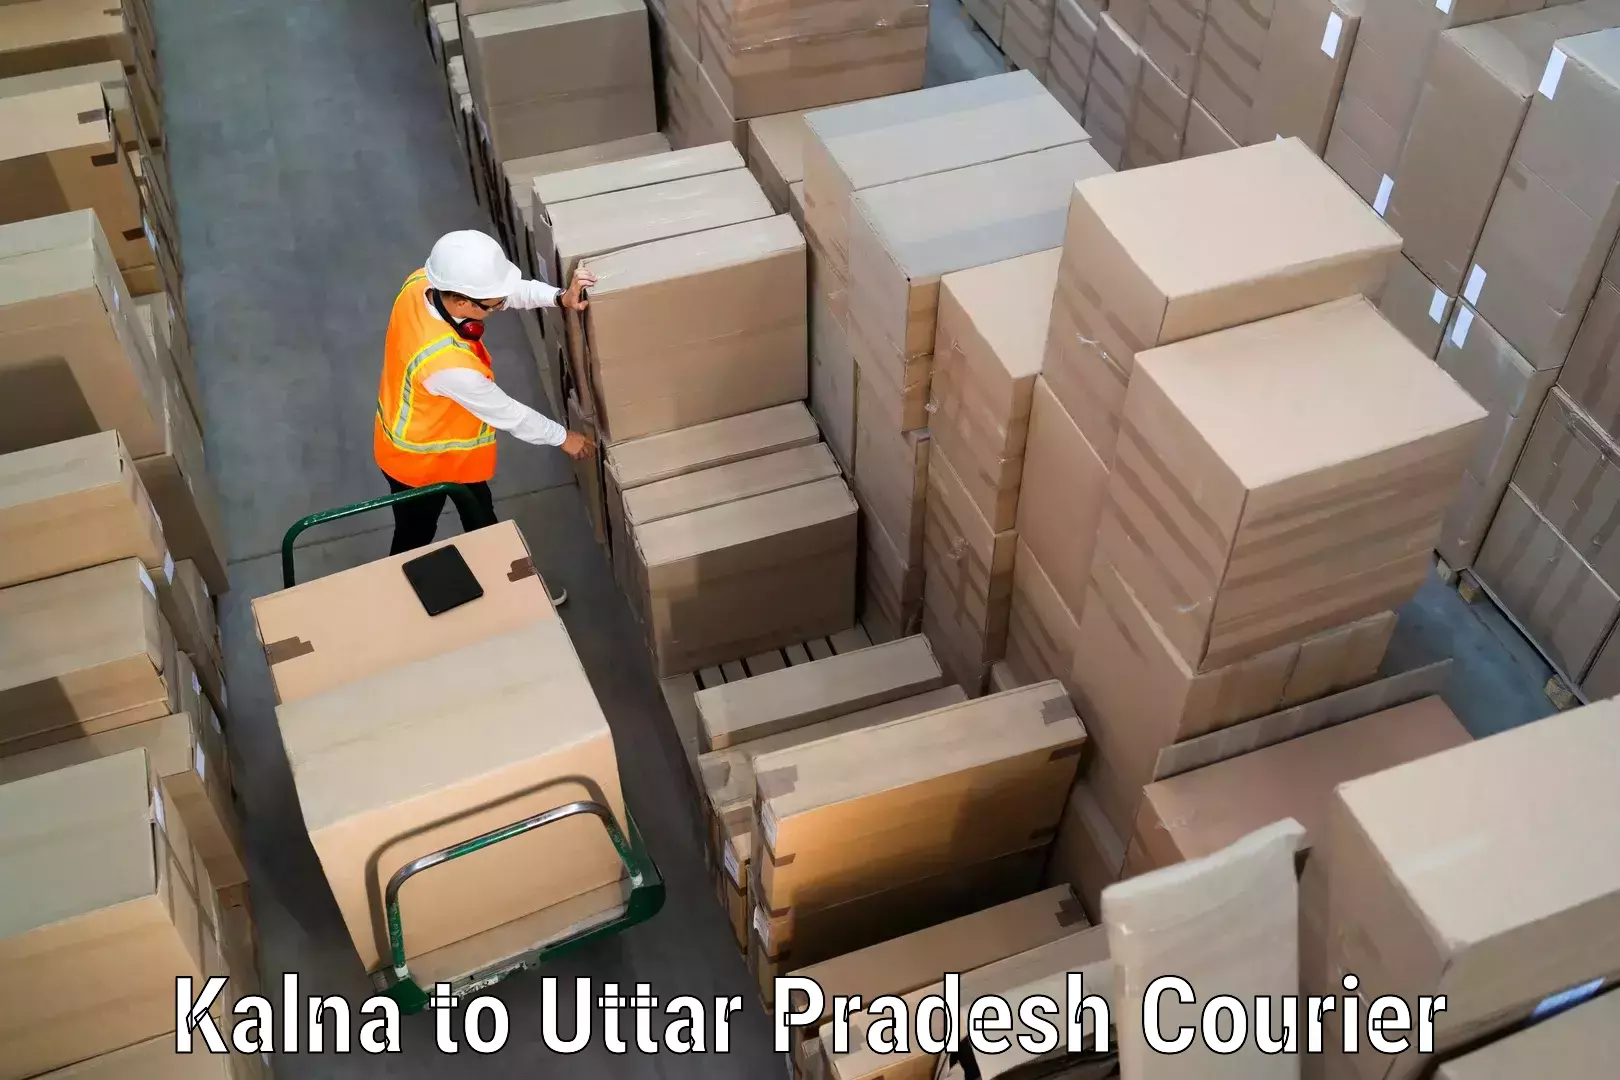 High-priority parcel service Kalna to Kanpur